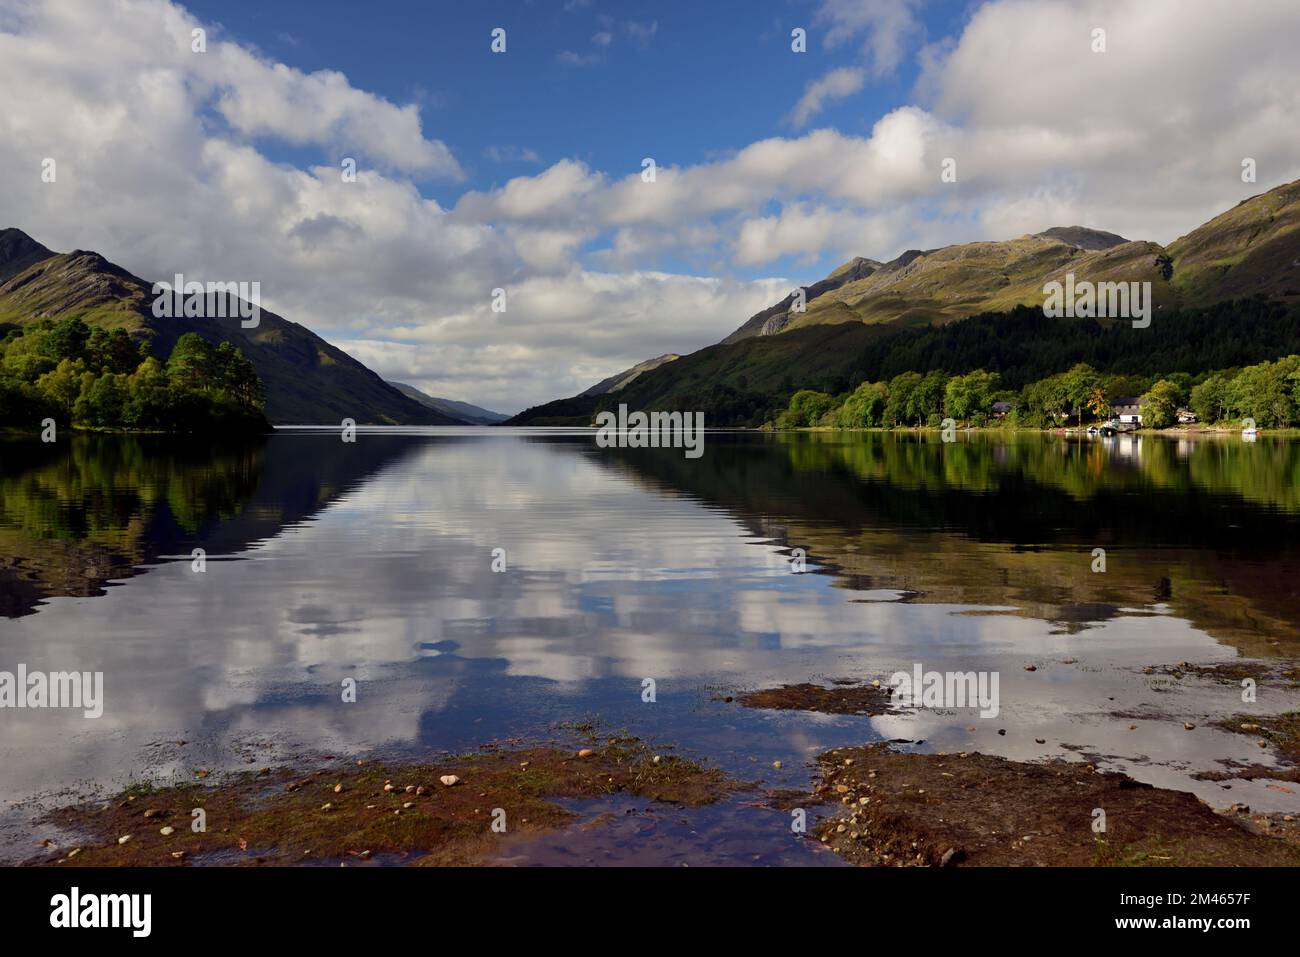 Reflections in Loch Shiel at Glenfinnan in the Scottish Highlands. Stock Photo